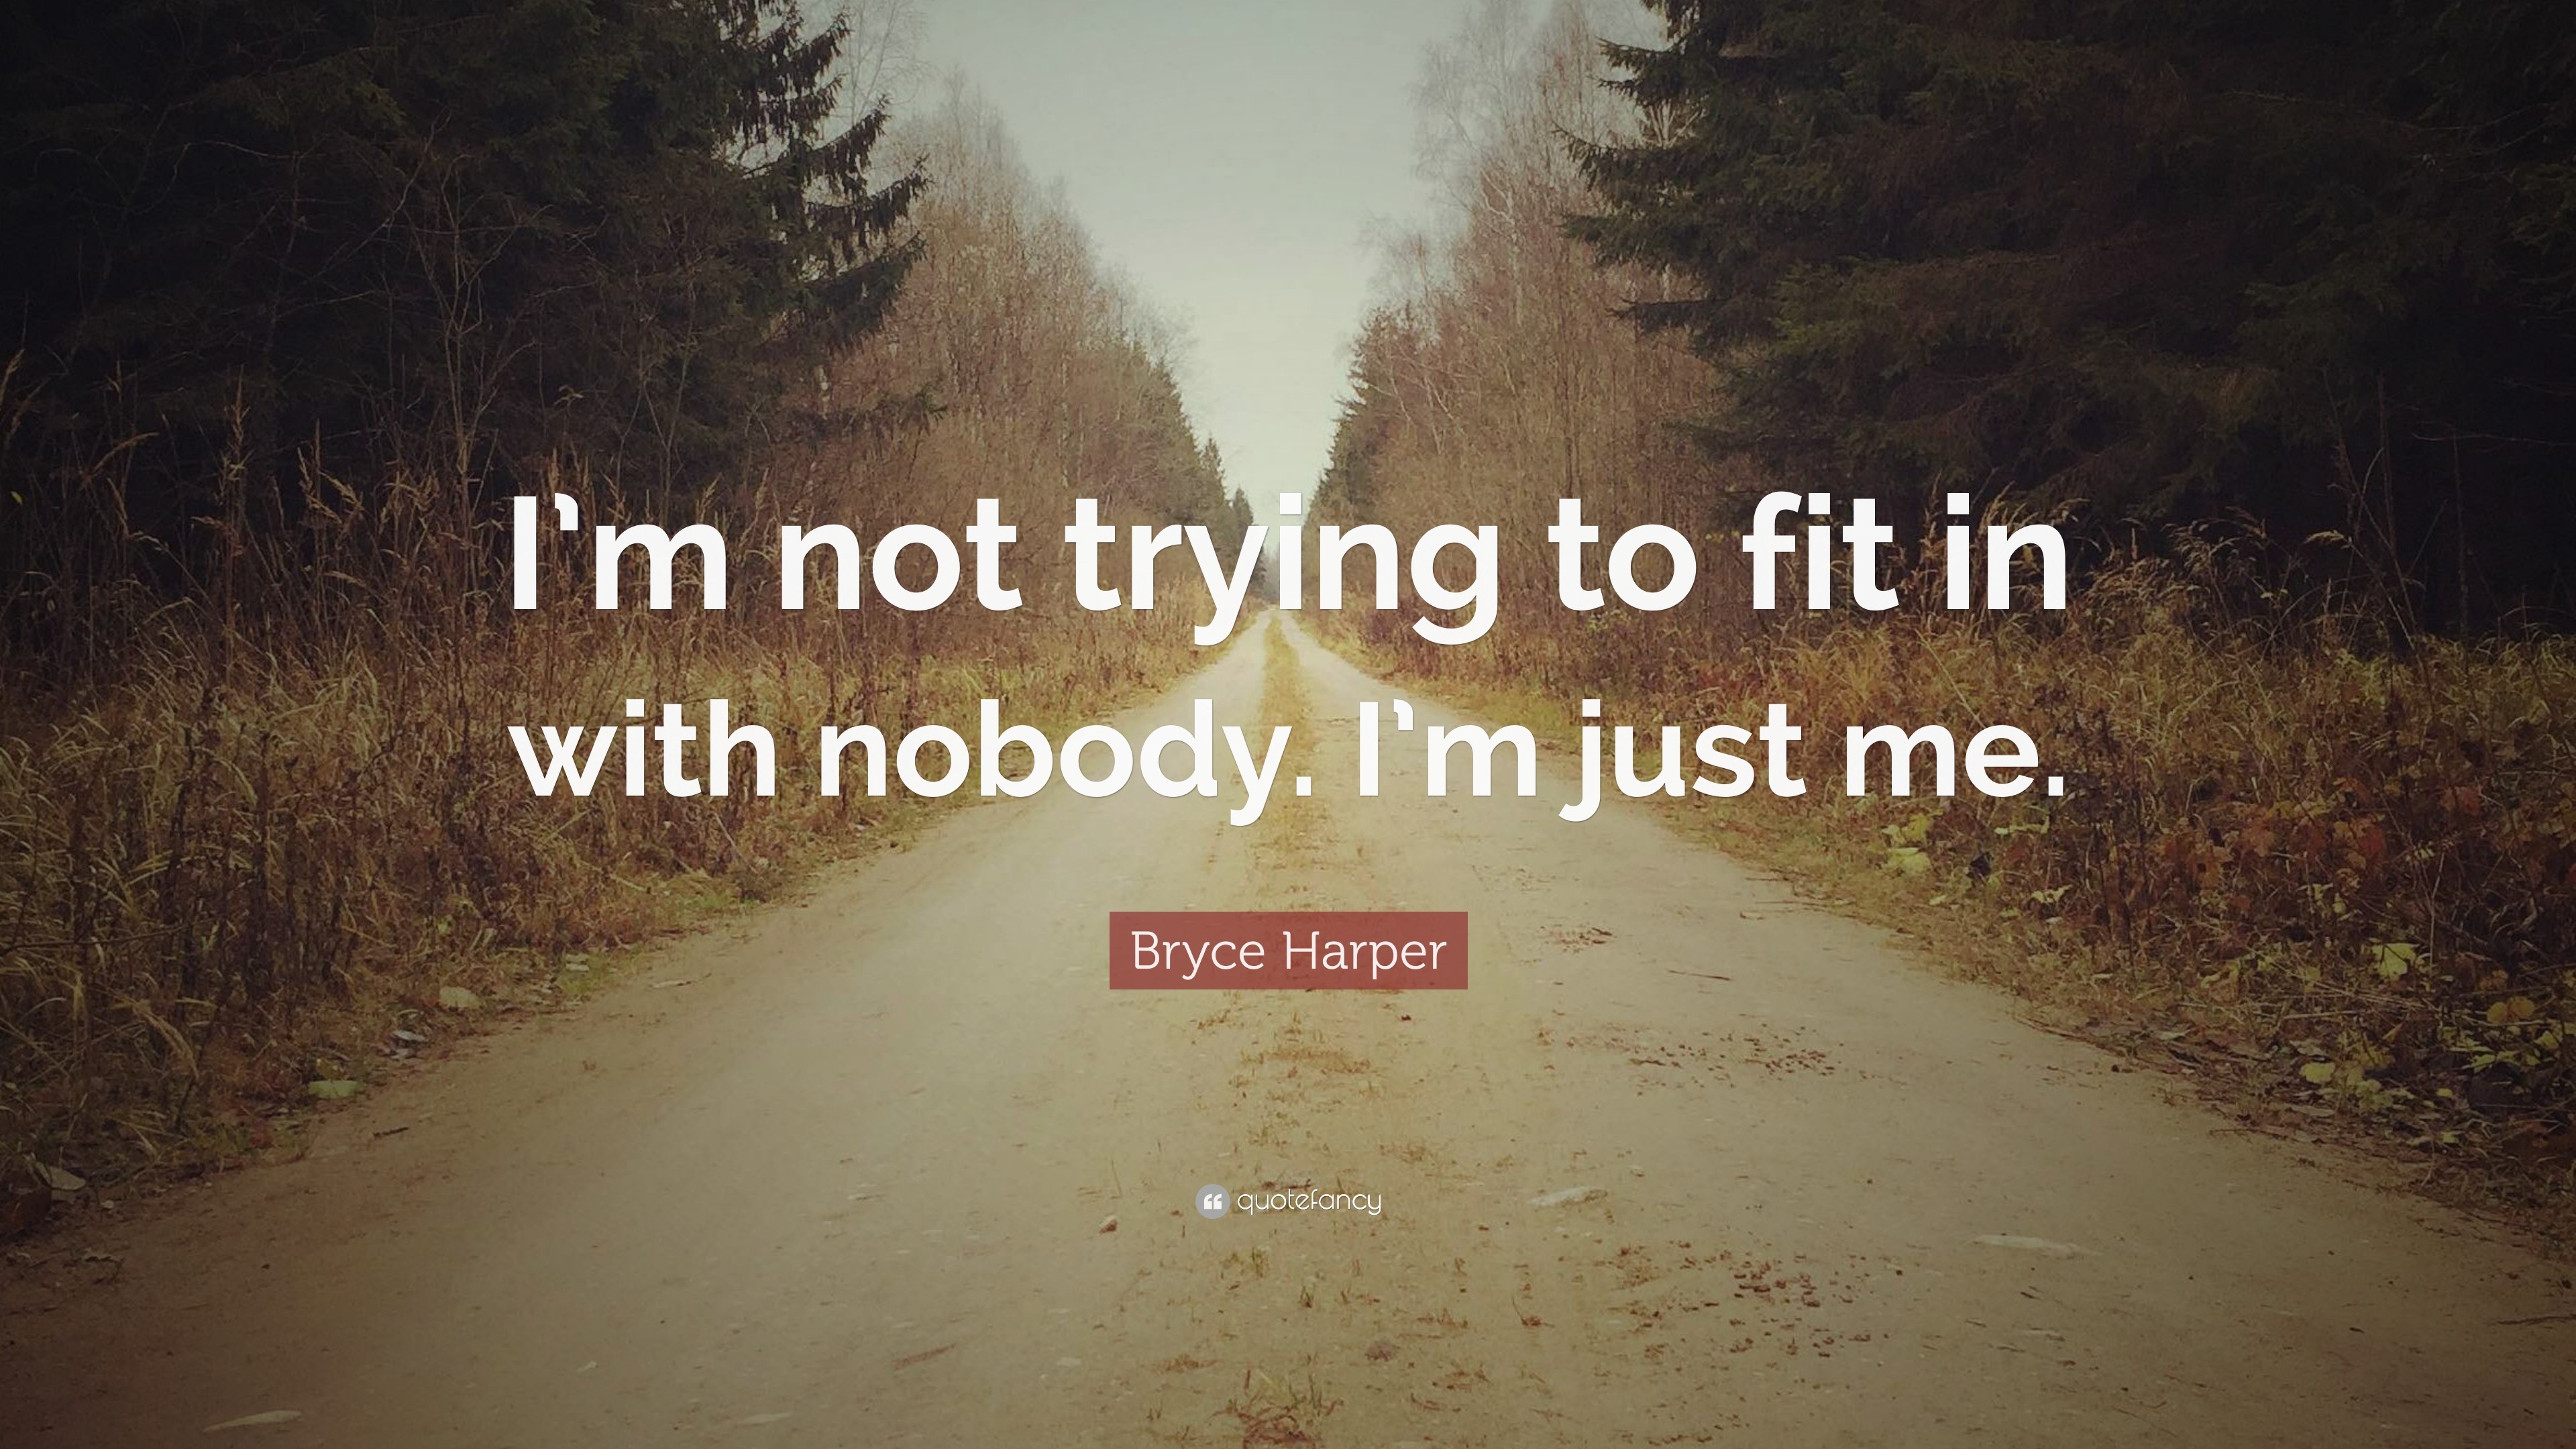 3840x2160 Bryce Harper Quote: “I'm not trying to fit in with nobody.